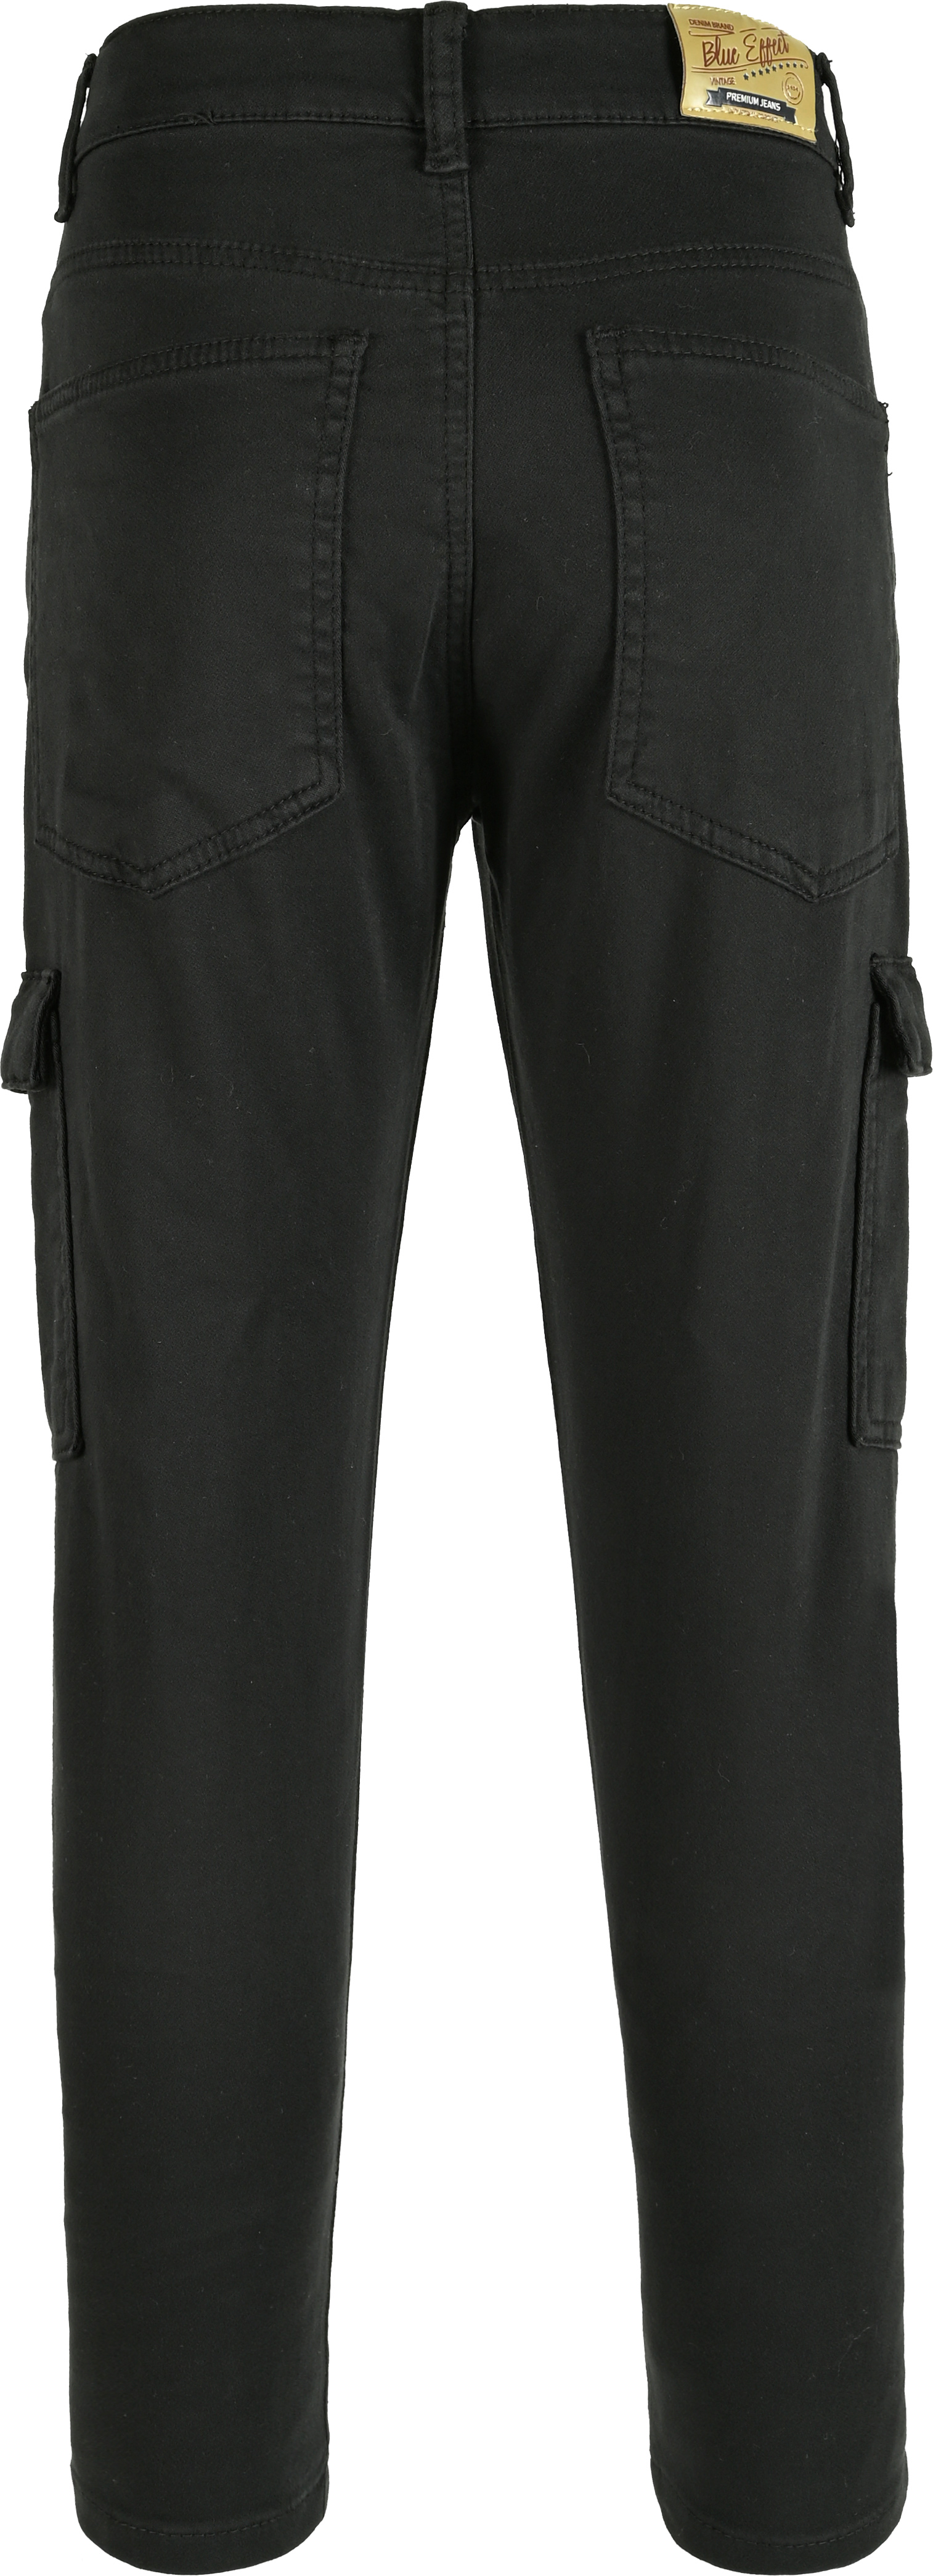 2836-Boys Cargo Loose Fit Pant available in Normal